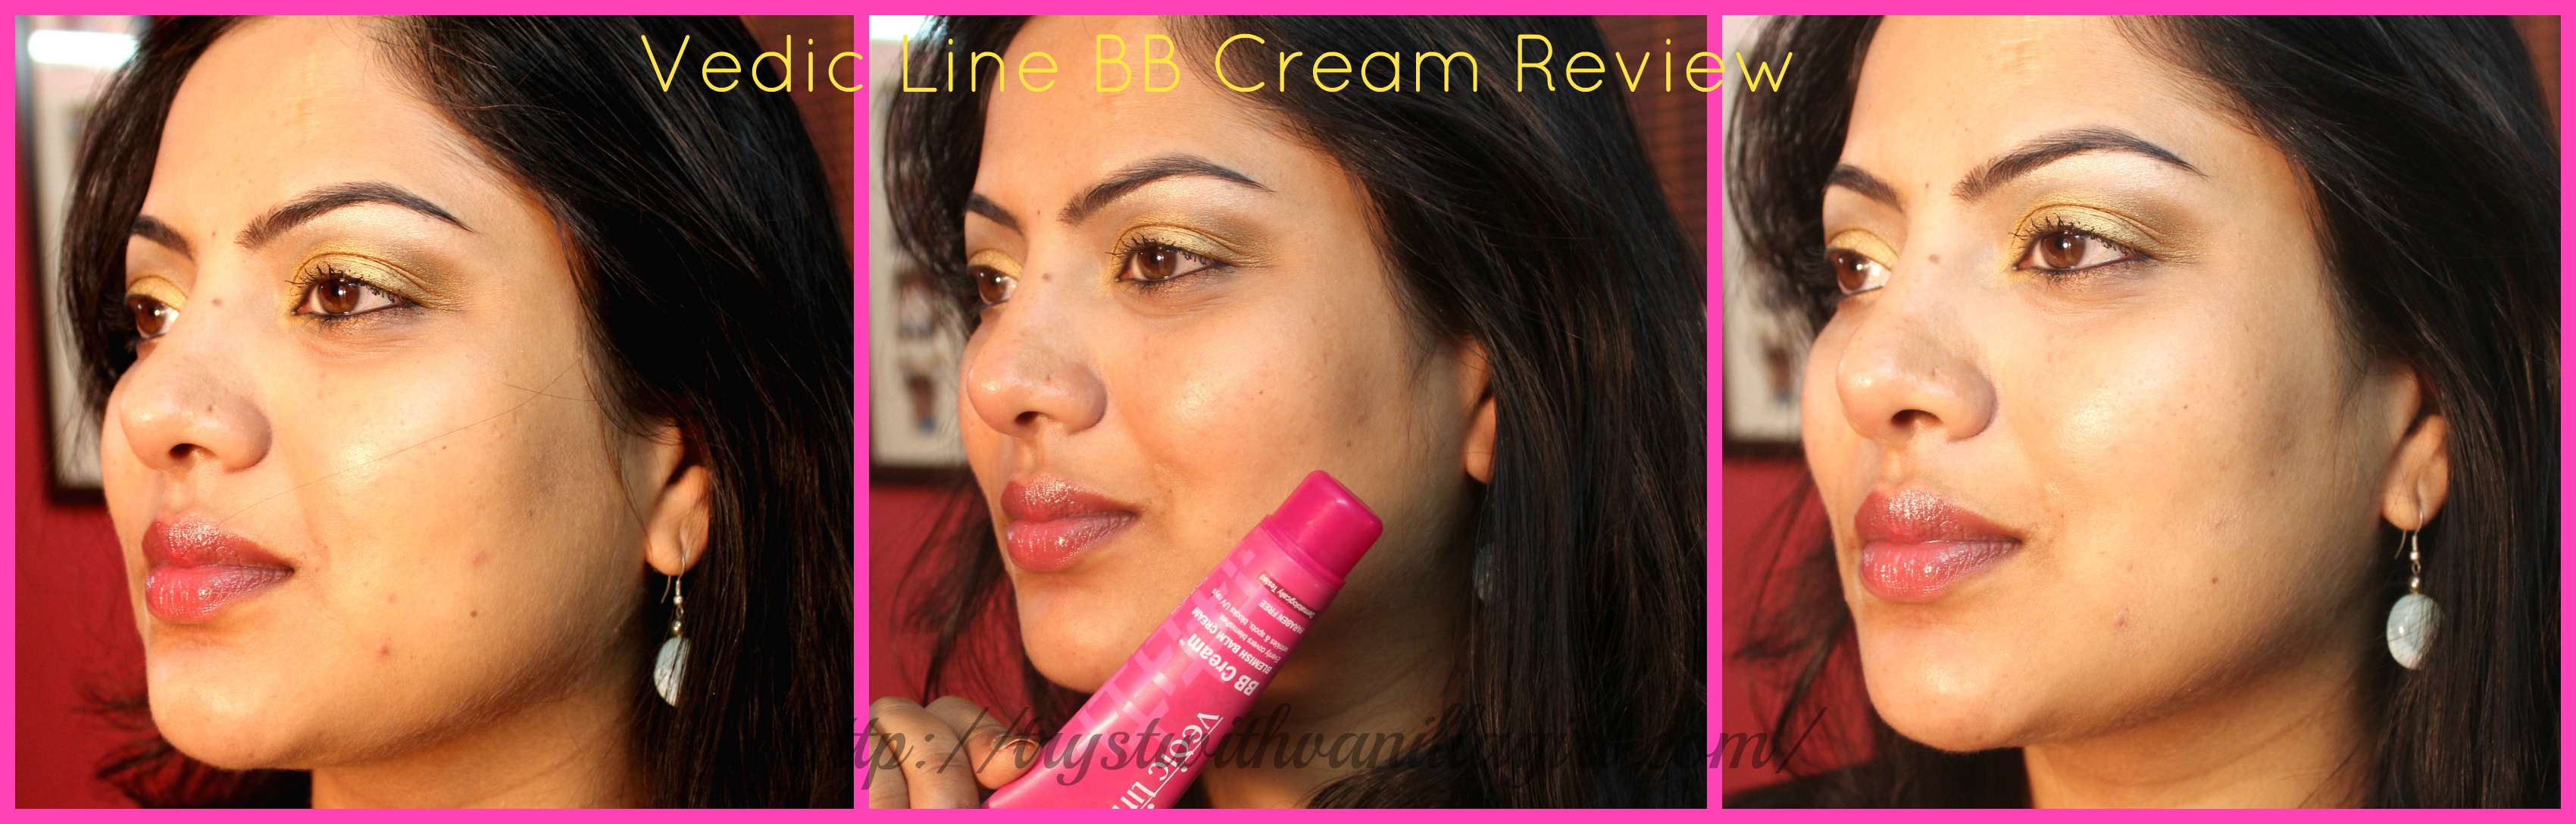 FIRST Vedic line BB Cream Review,swatch,Photos,Demo